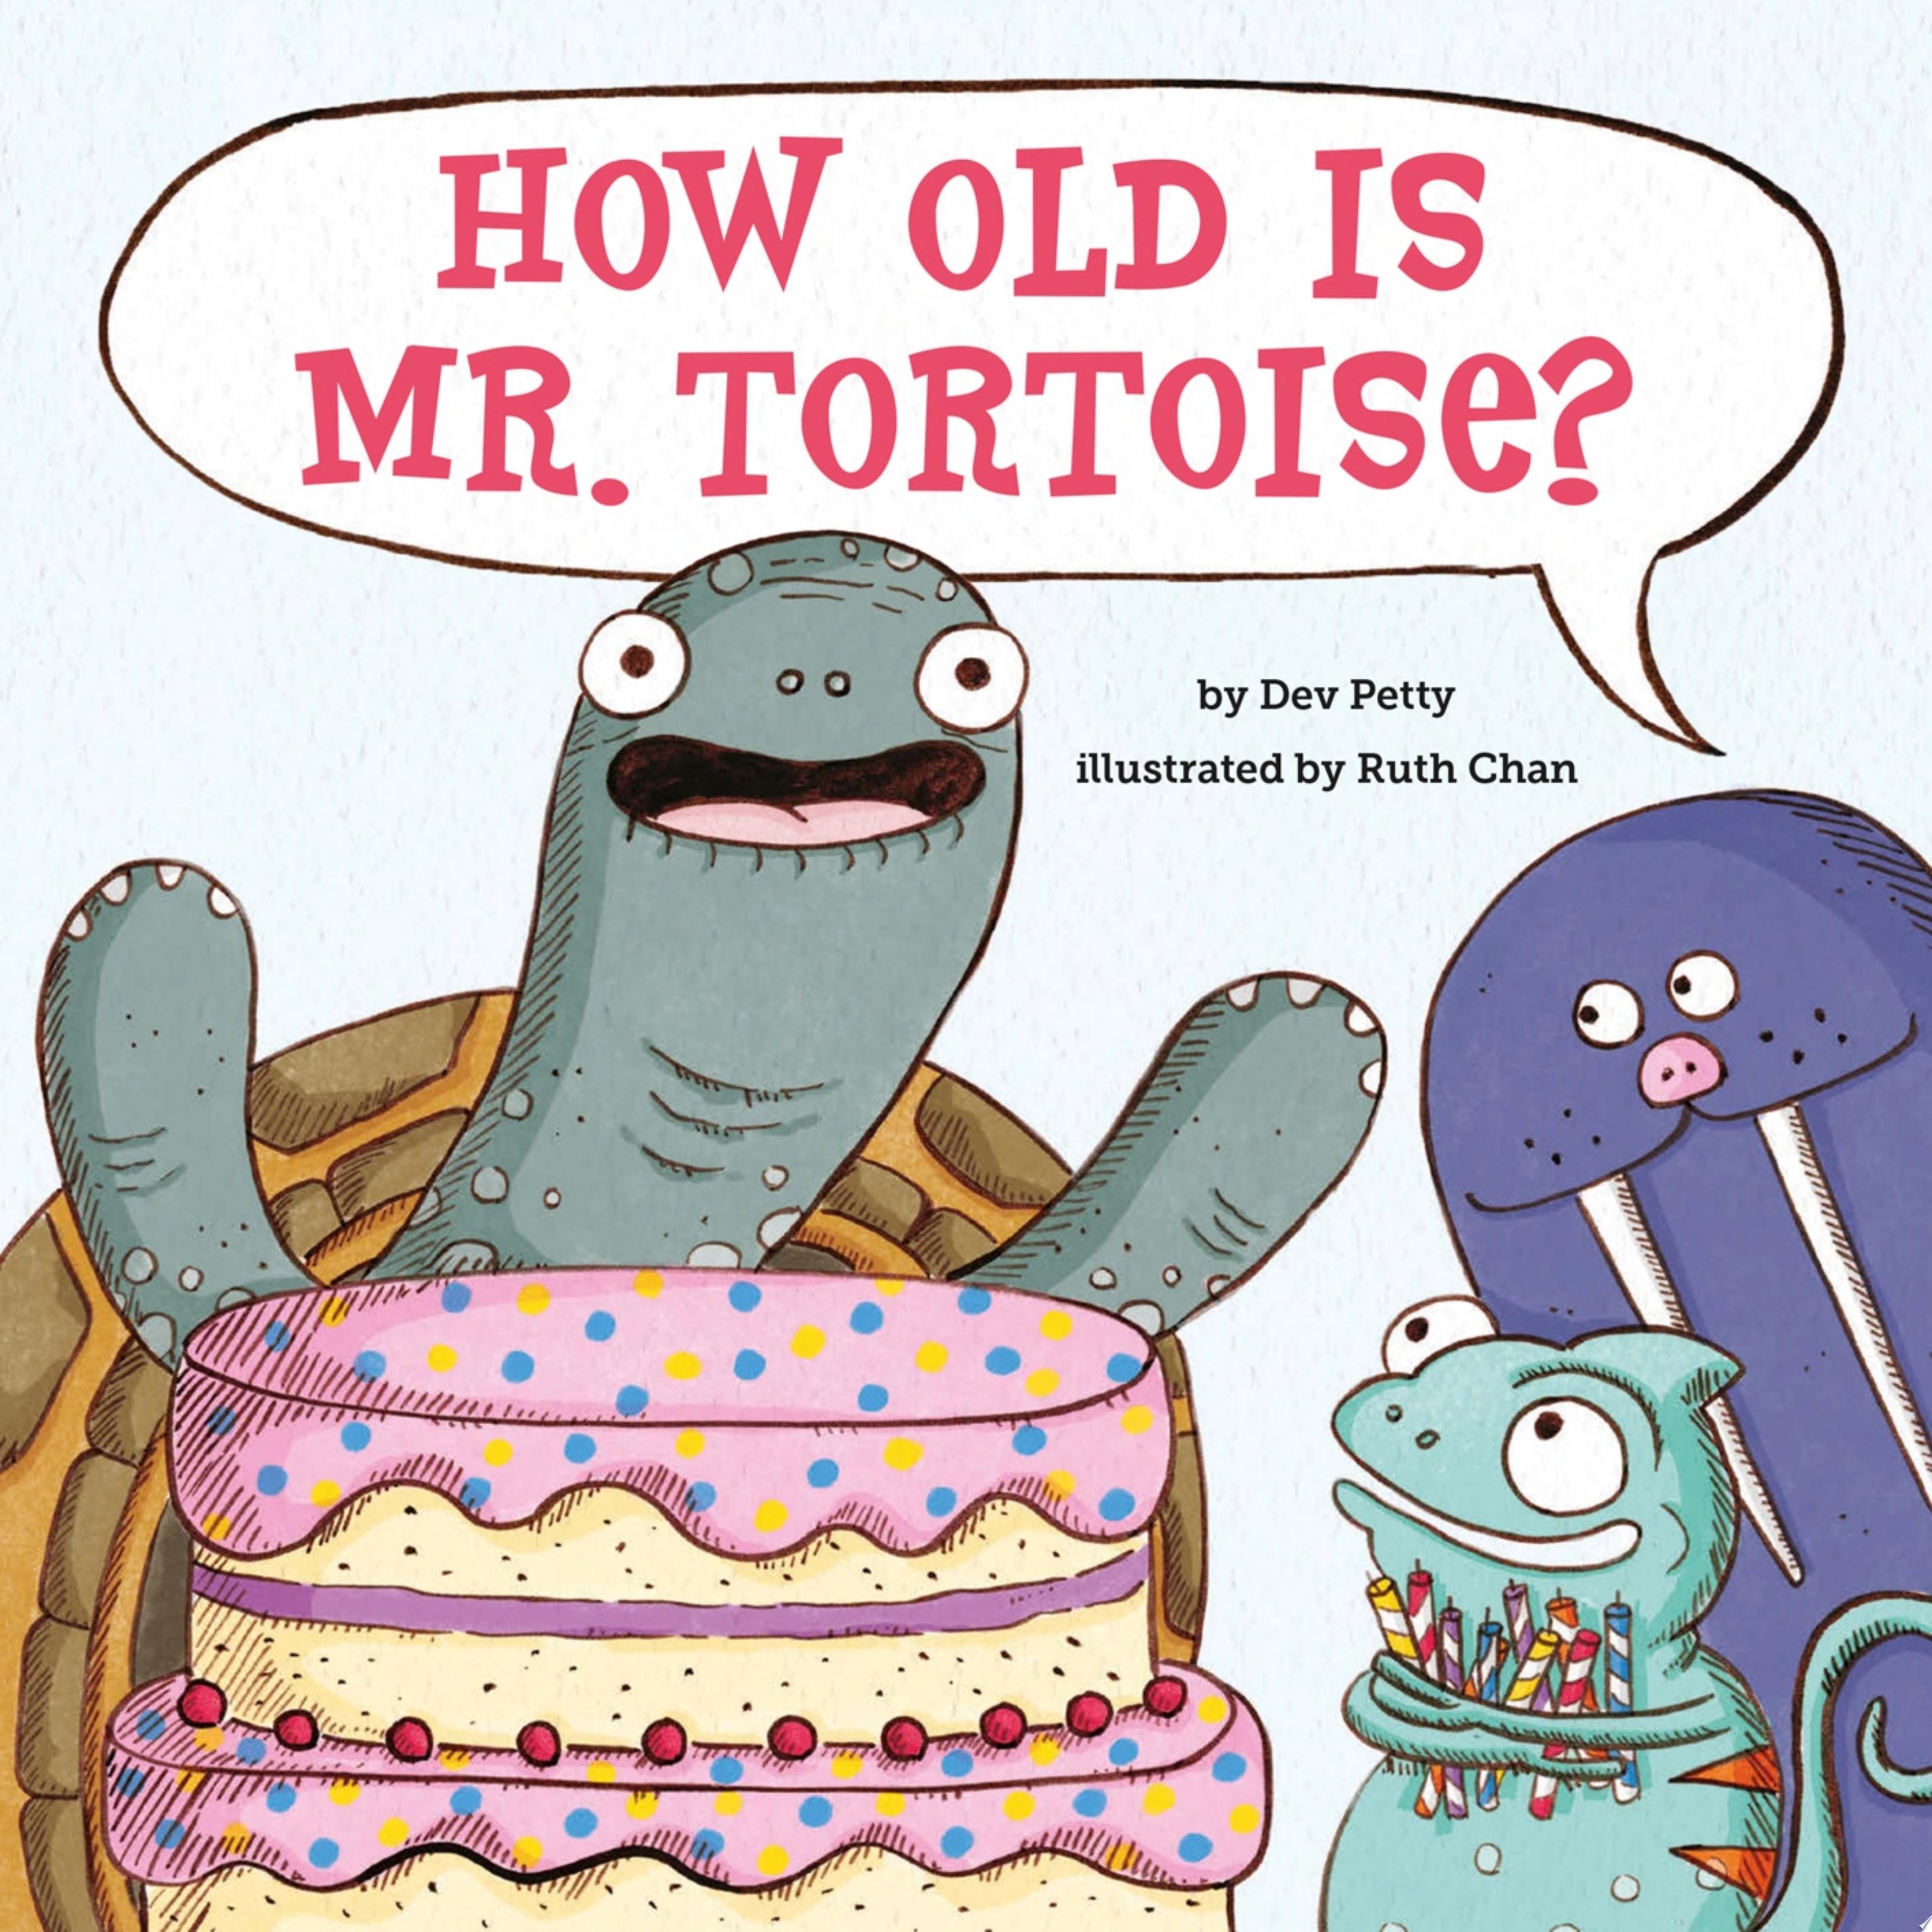 Image for "How Old Is Mr. Tortoise?"